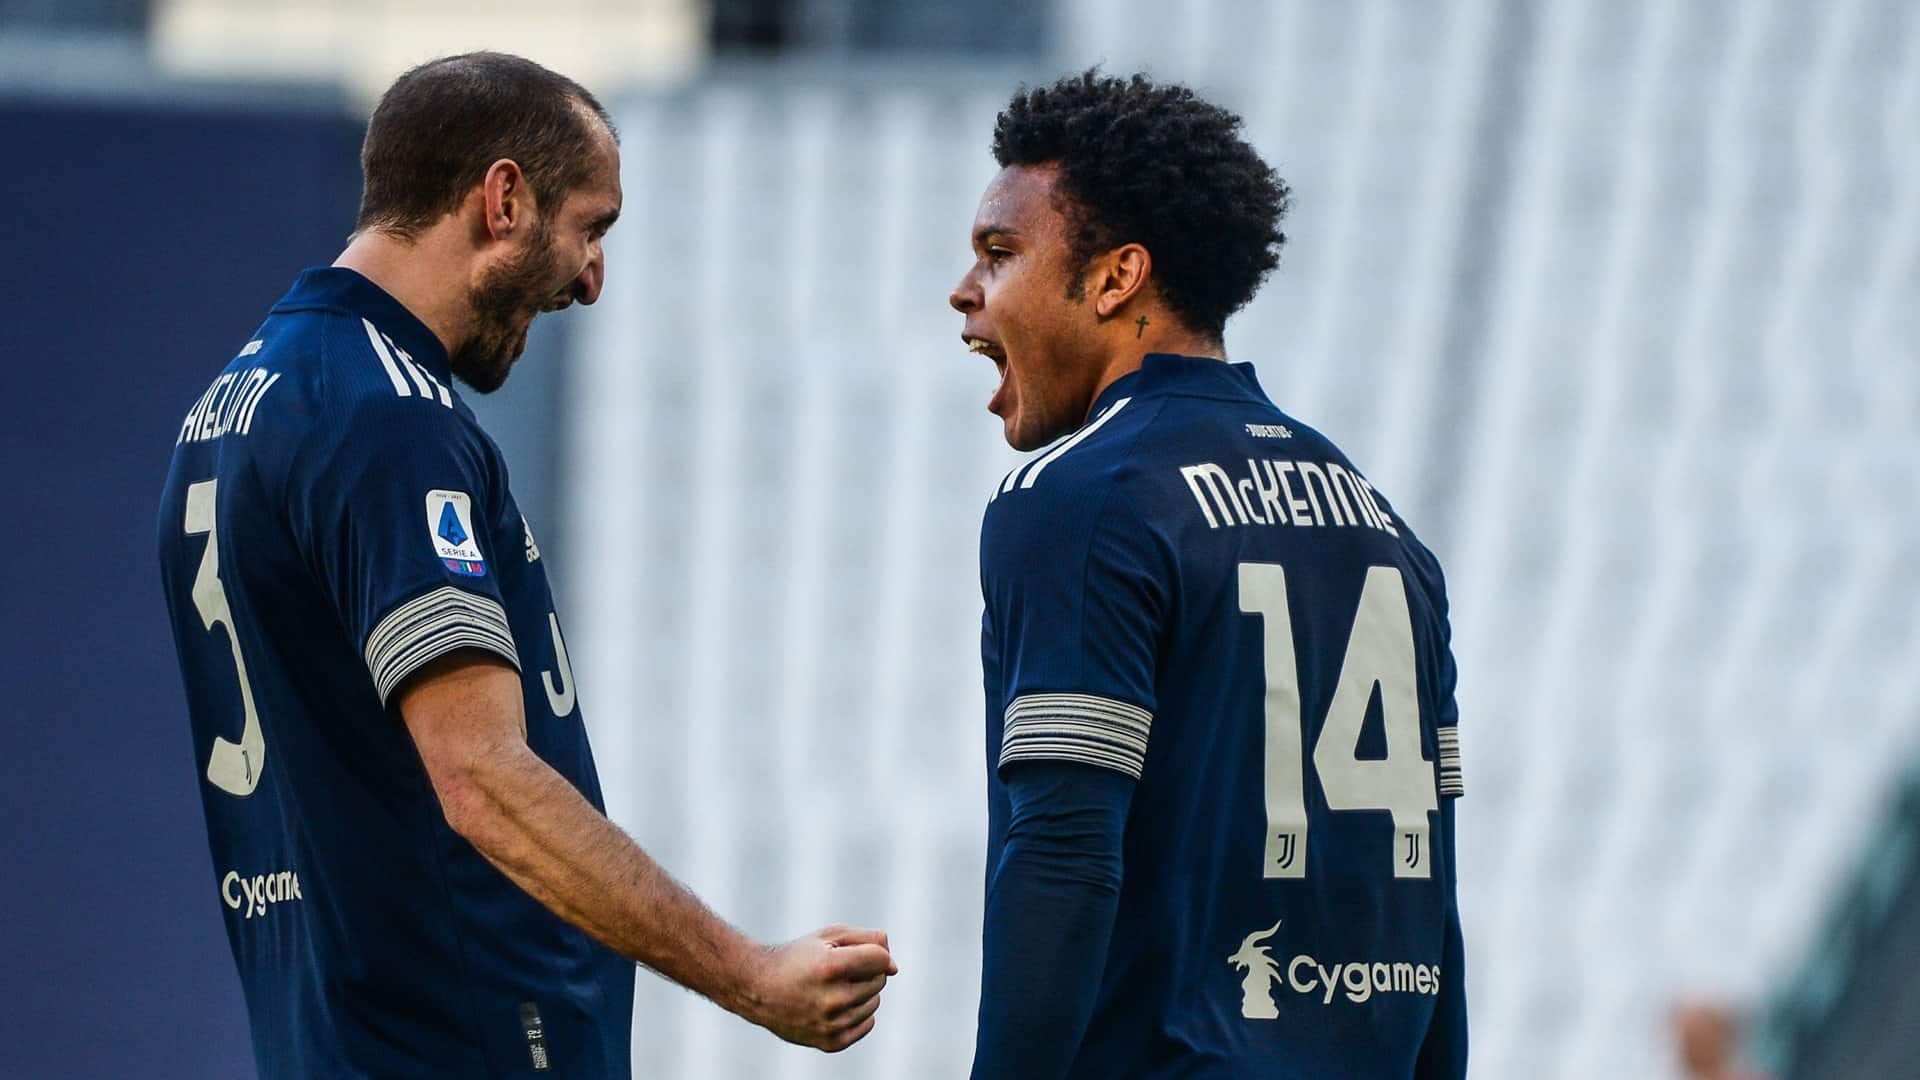 In Juve days, a photo of Giorgio Chiellini yelling at Weston McKennie. It's either a goal celebration, an argument about ranch dressing, or Chiellini is annoyed that McKennie has soiled himself, not sure which